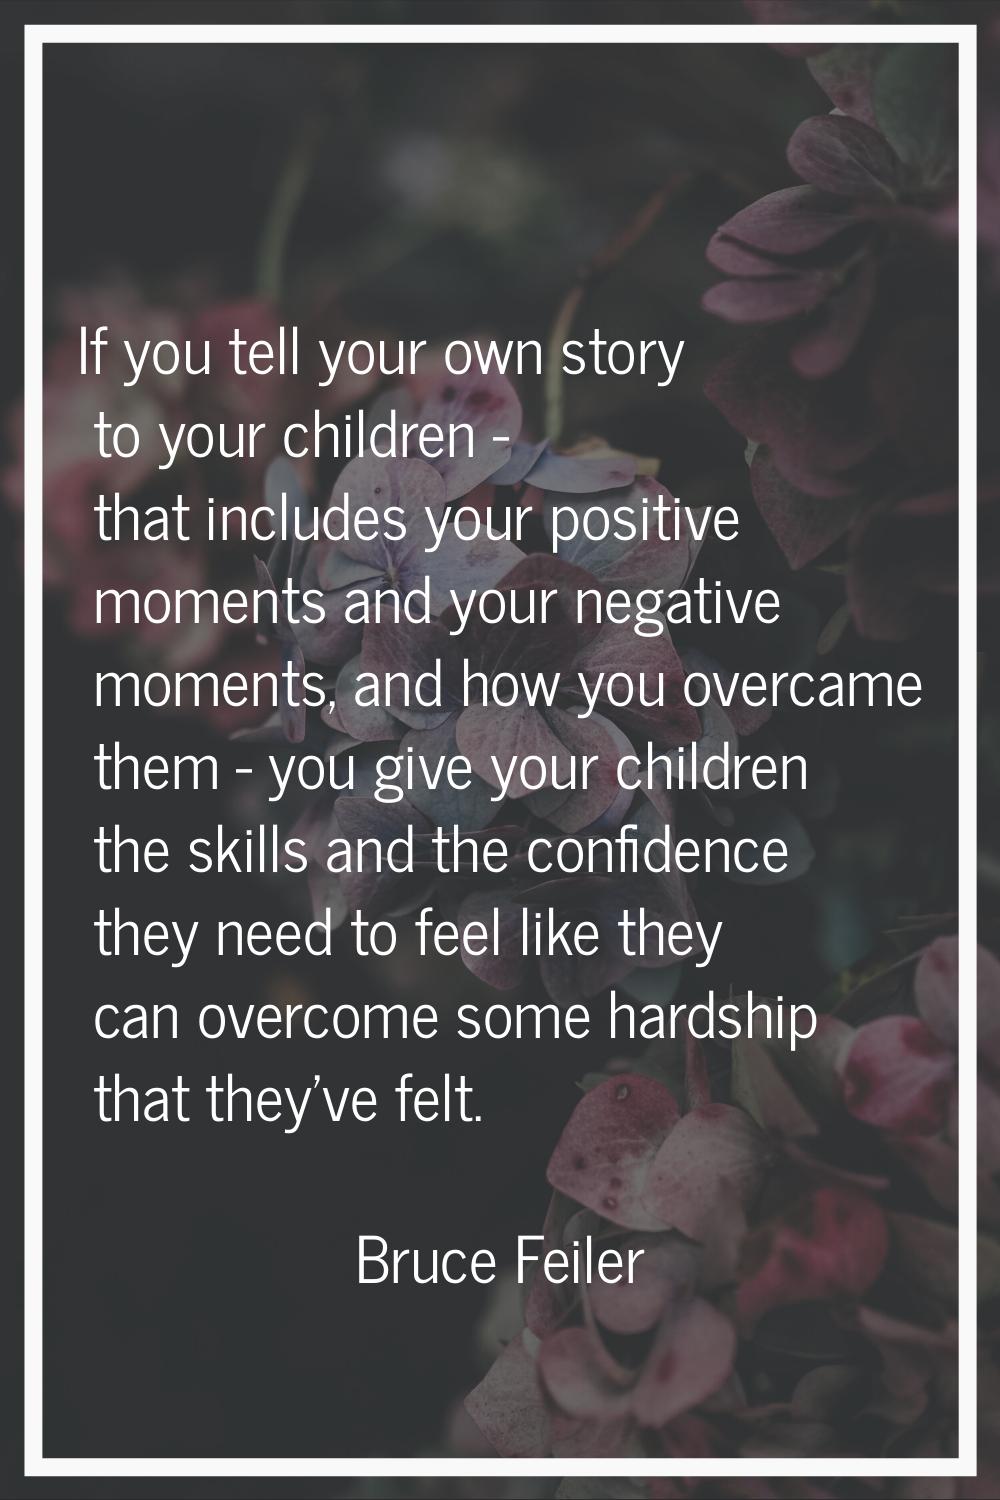 If you tell your own story to your children - that includes your positive moments and your negative